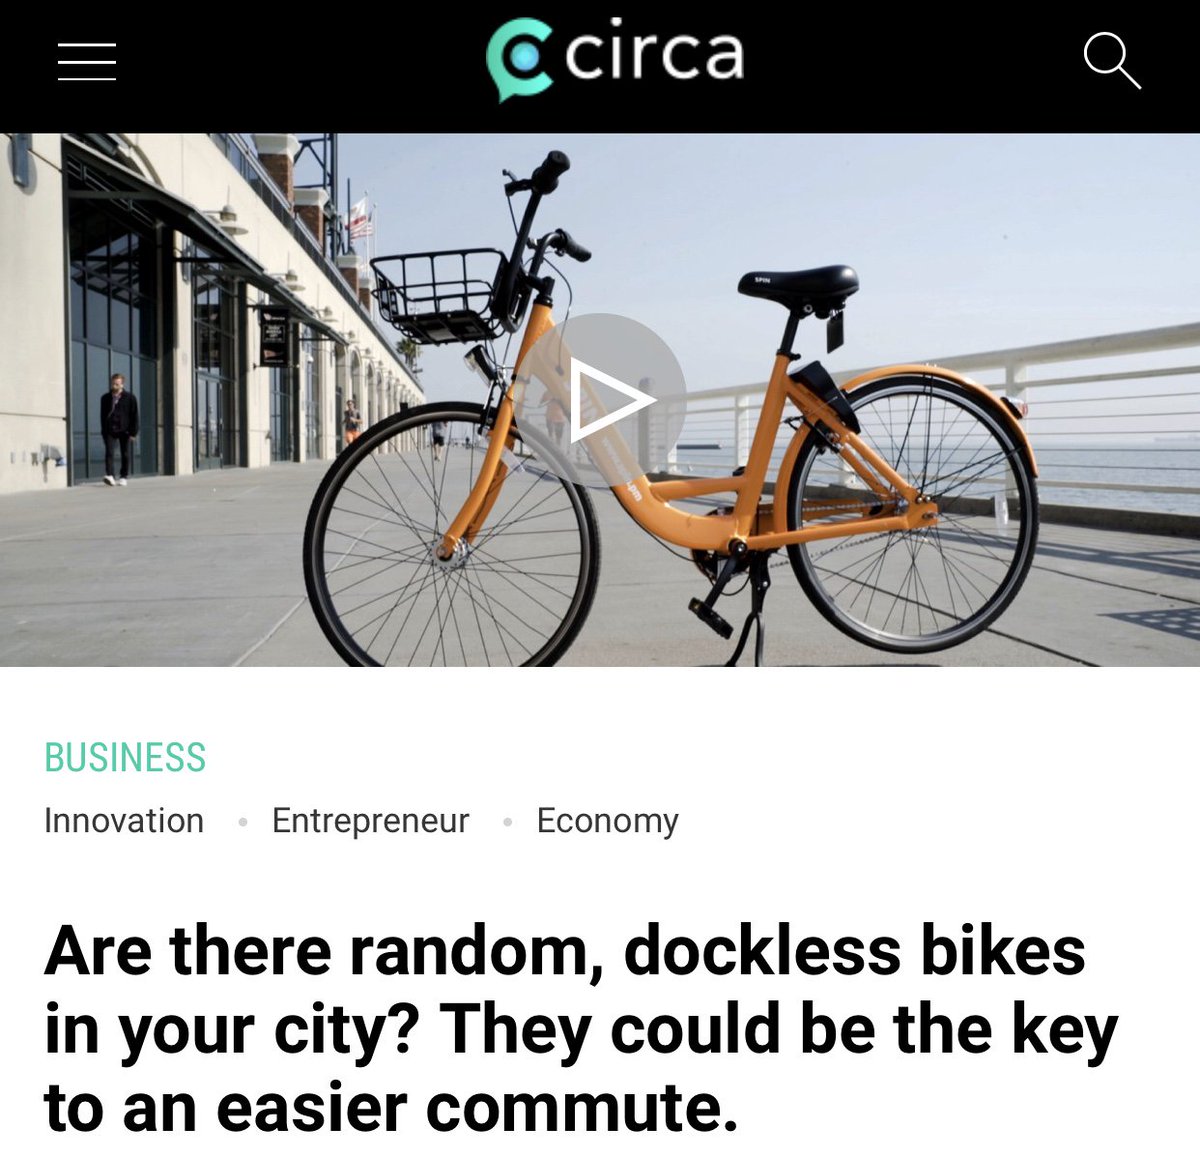 The key to an easier commute may be found throughout your city! Check out this great article on @Circa featuring Spin and how bikeshare can make your commute easier. 👌🏽🚲 #UnlockYourCommute #UnlockYourSpin 

circa.com/story/2017/11/…